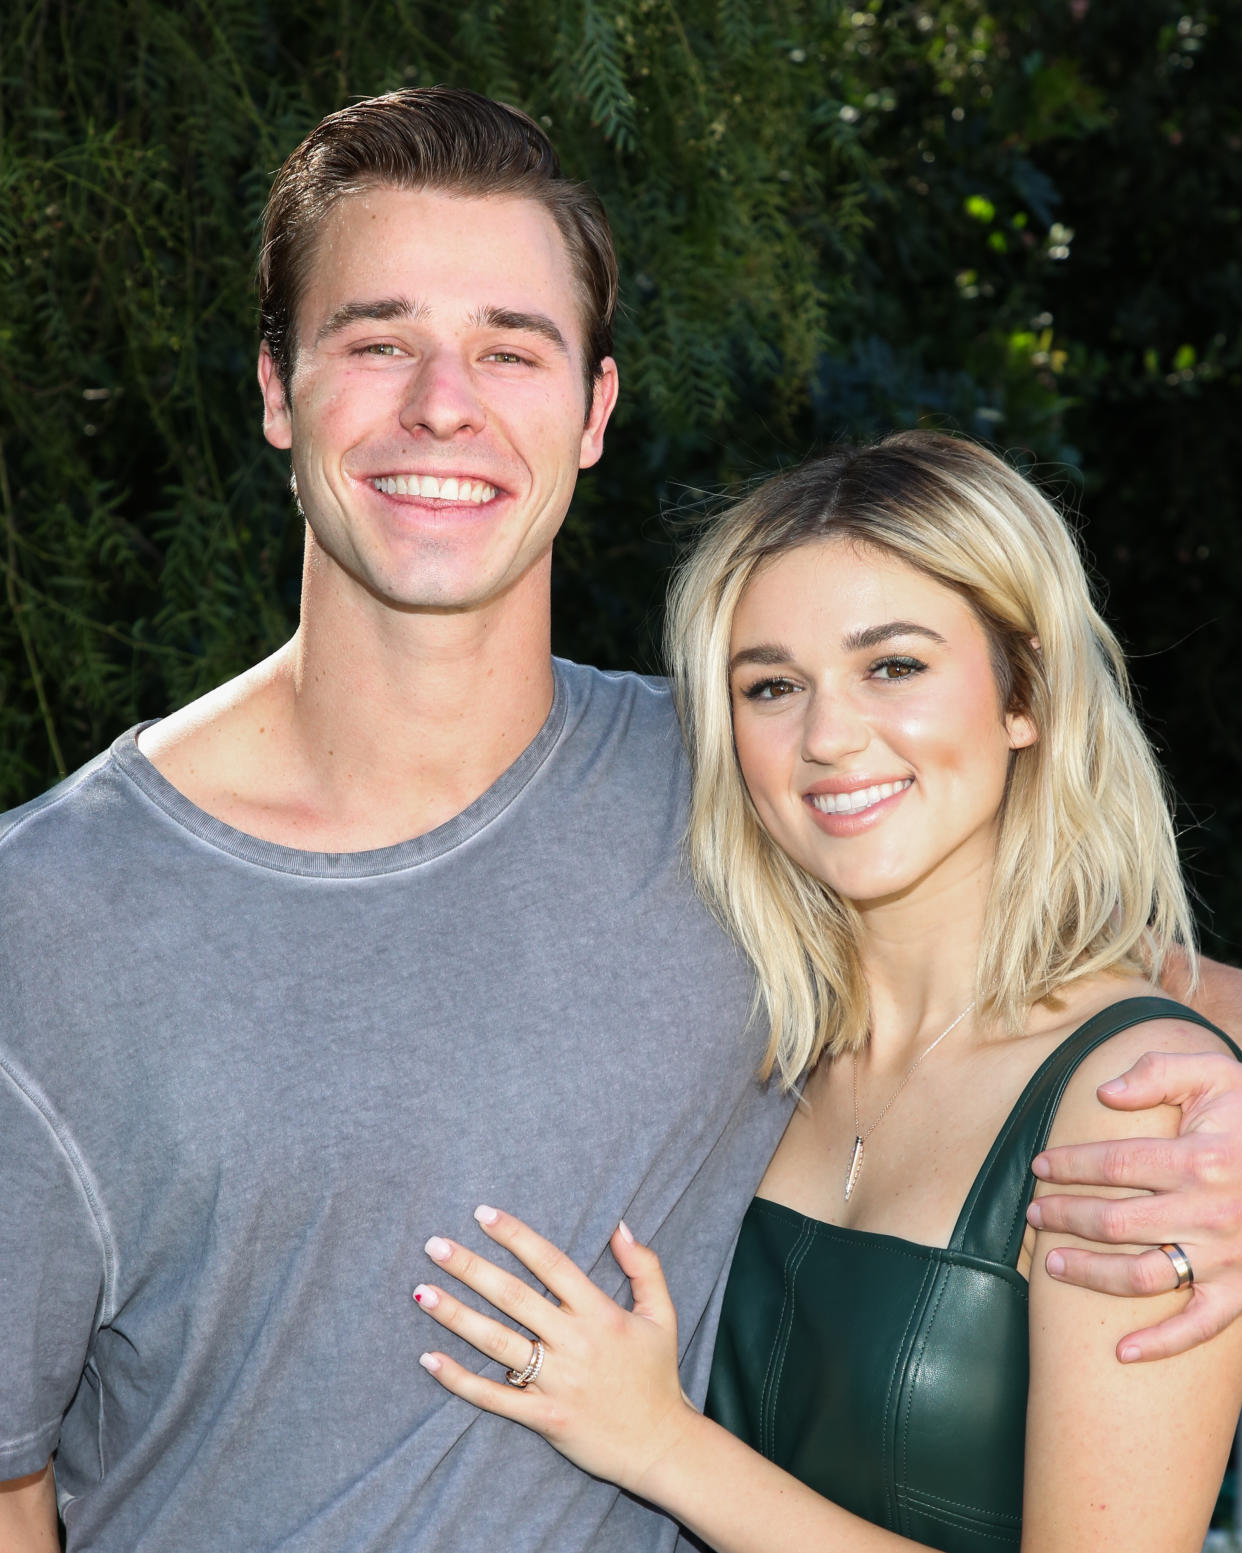 Sadie Robertson and Christian Huff welcomed their first baby in May 2021. (Photo: Paul Archuleta/Getty Images)